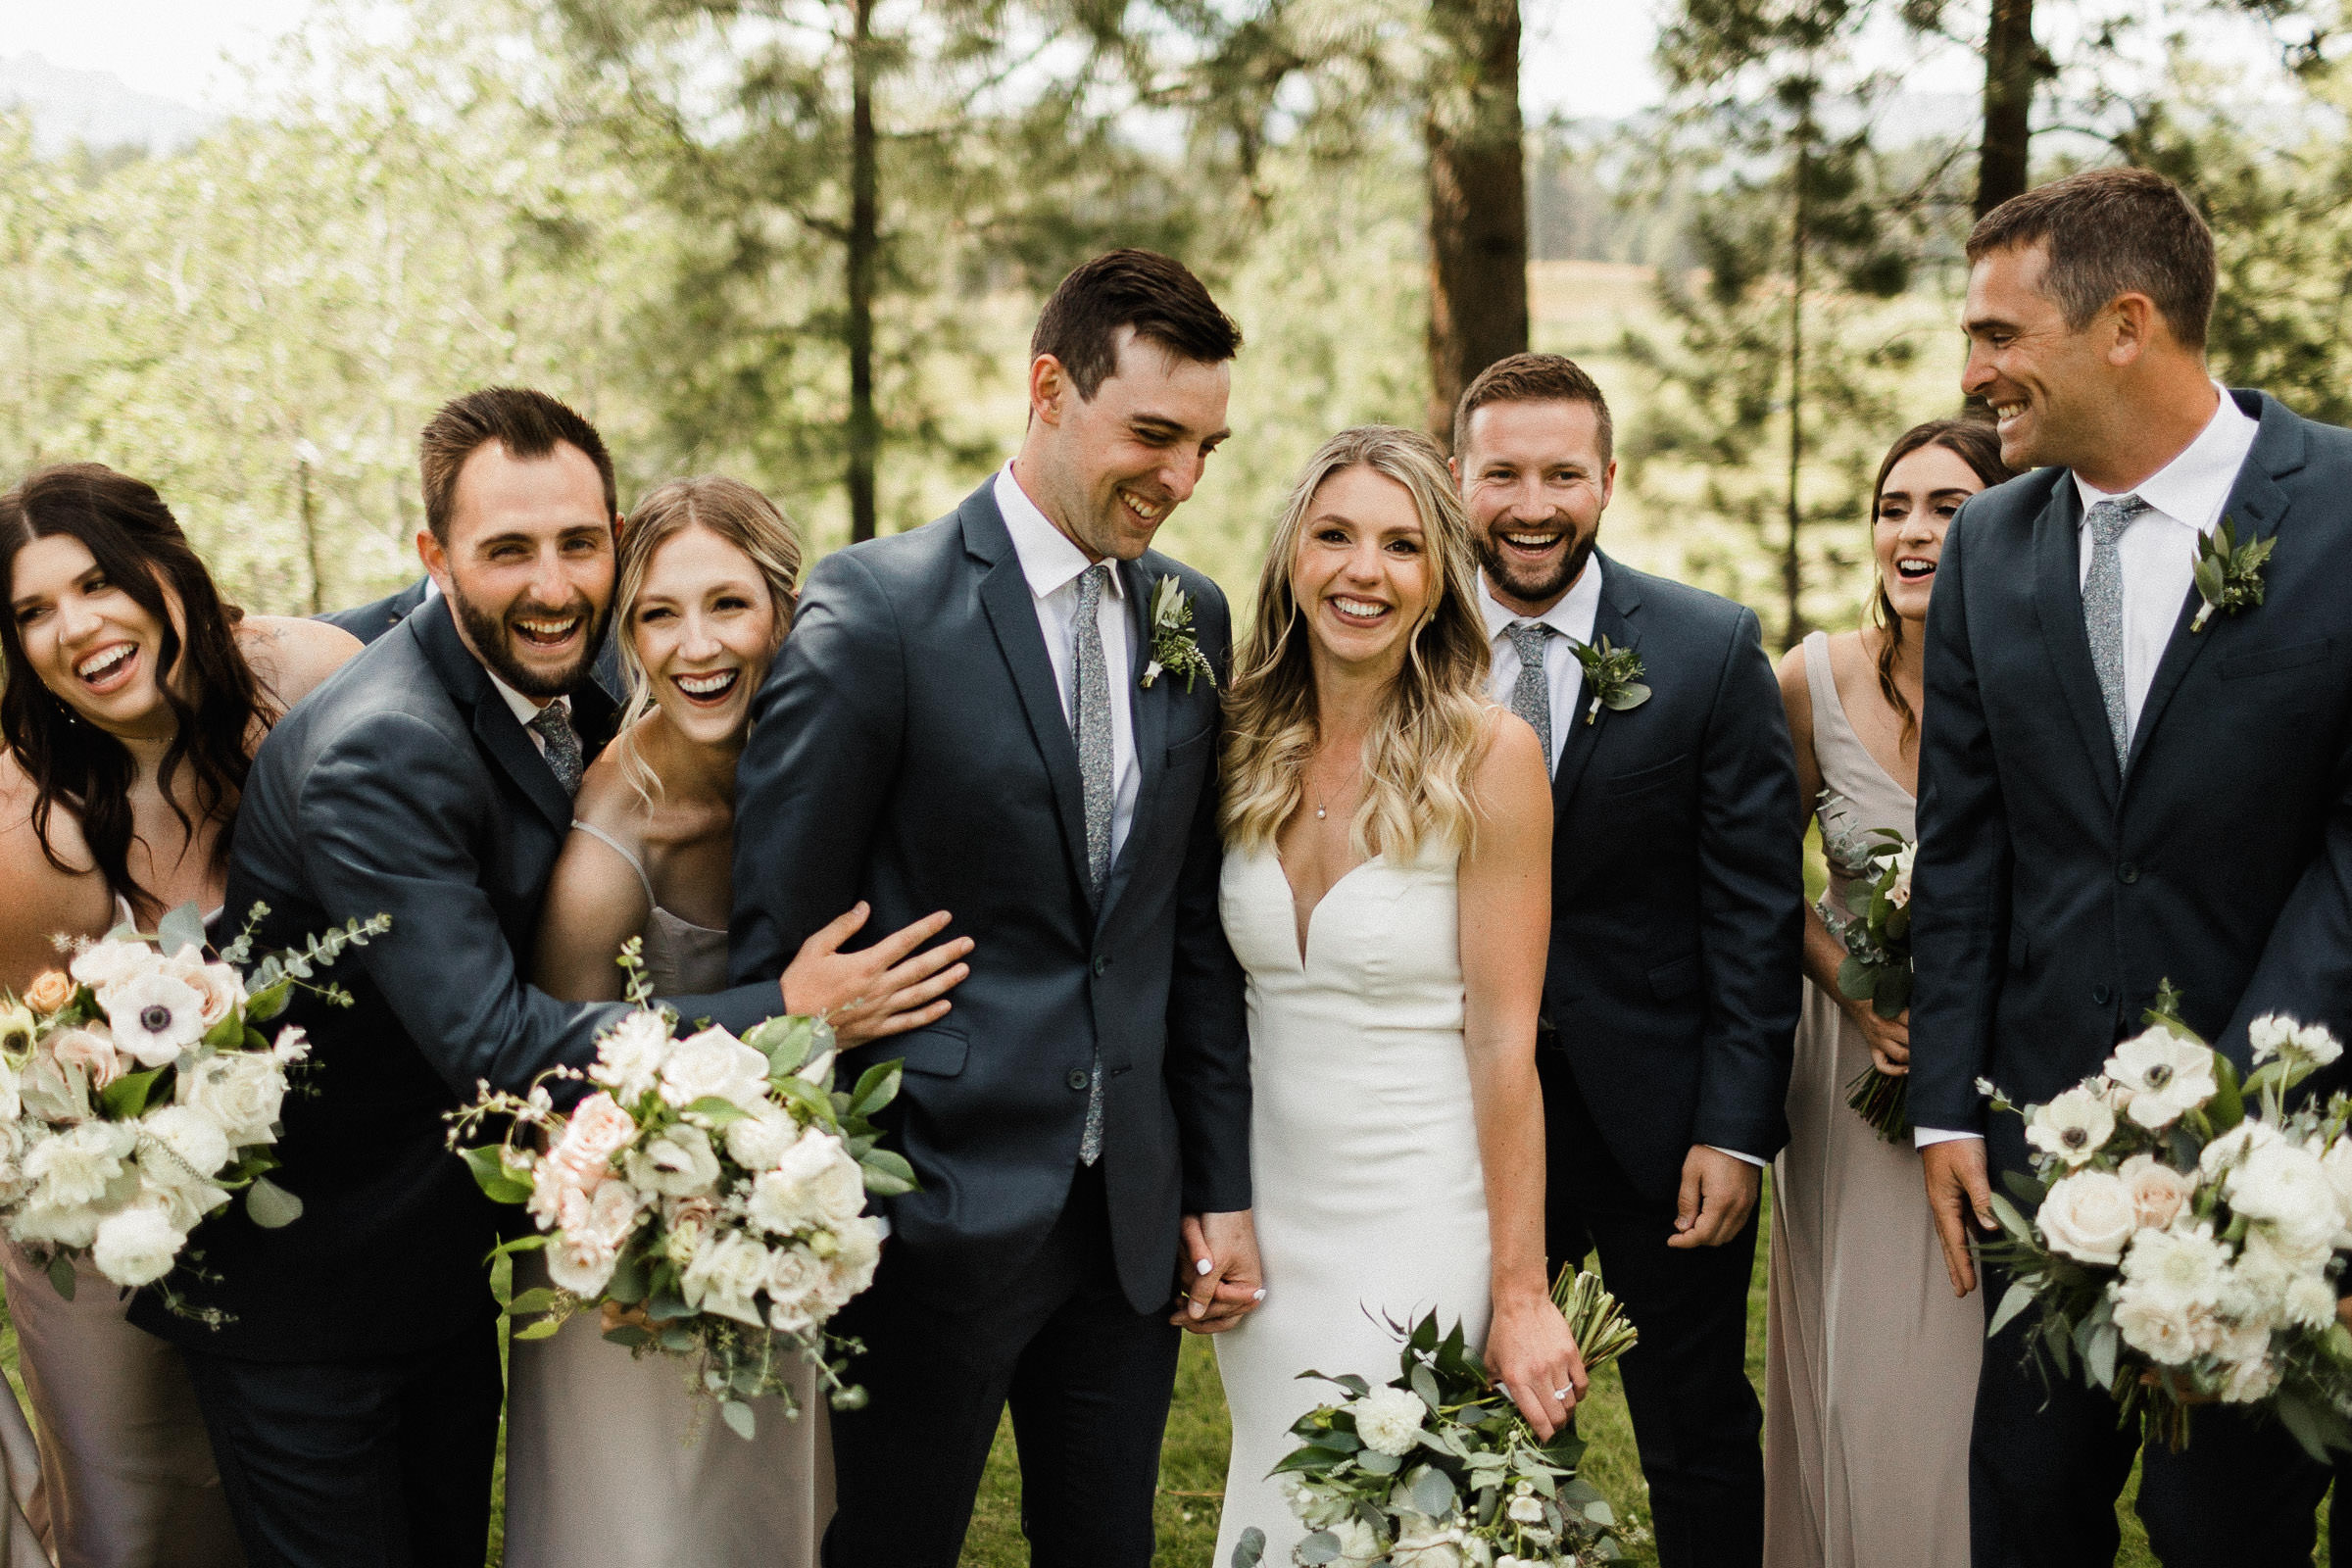 Bride and groom are surrounded by their bridesmaids and groomsmen, all laughing